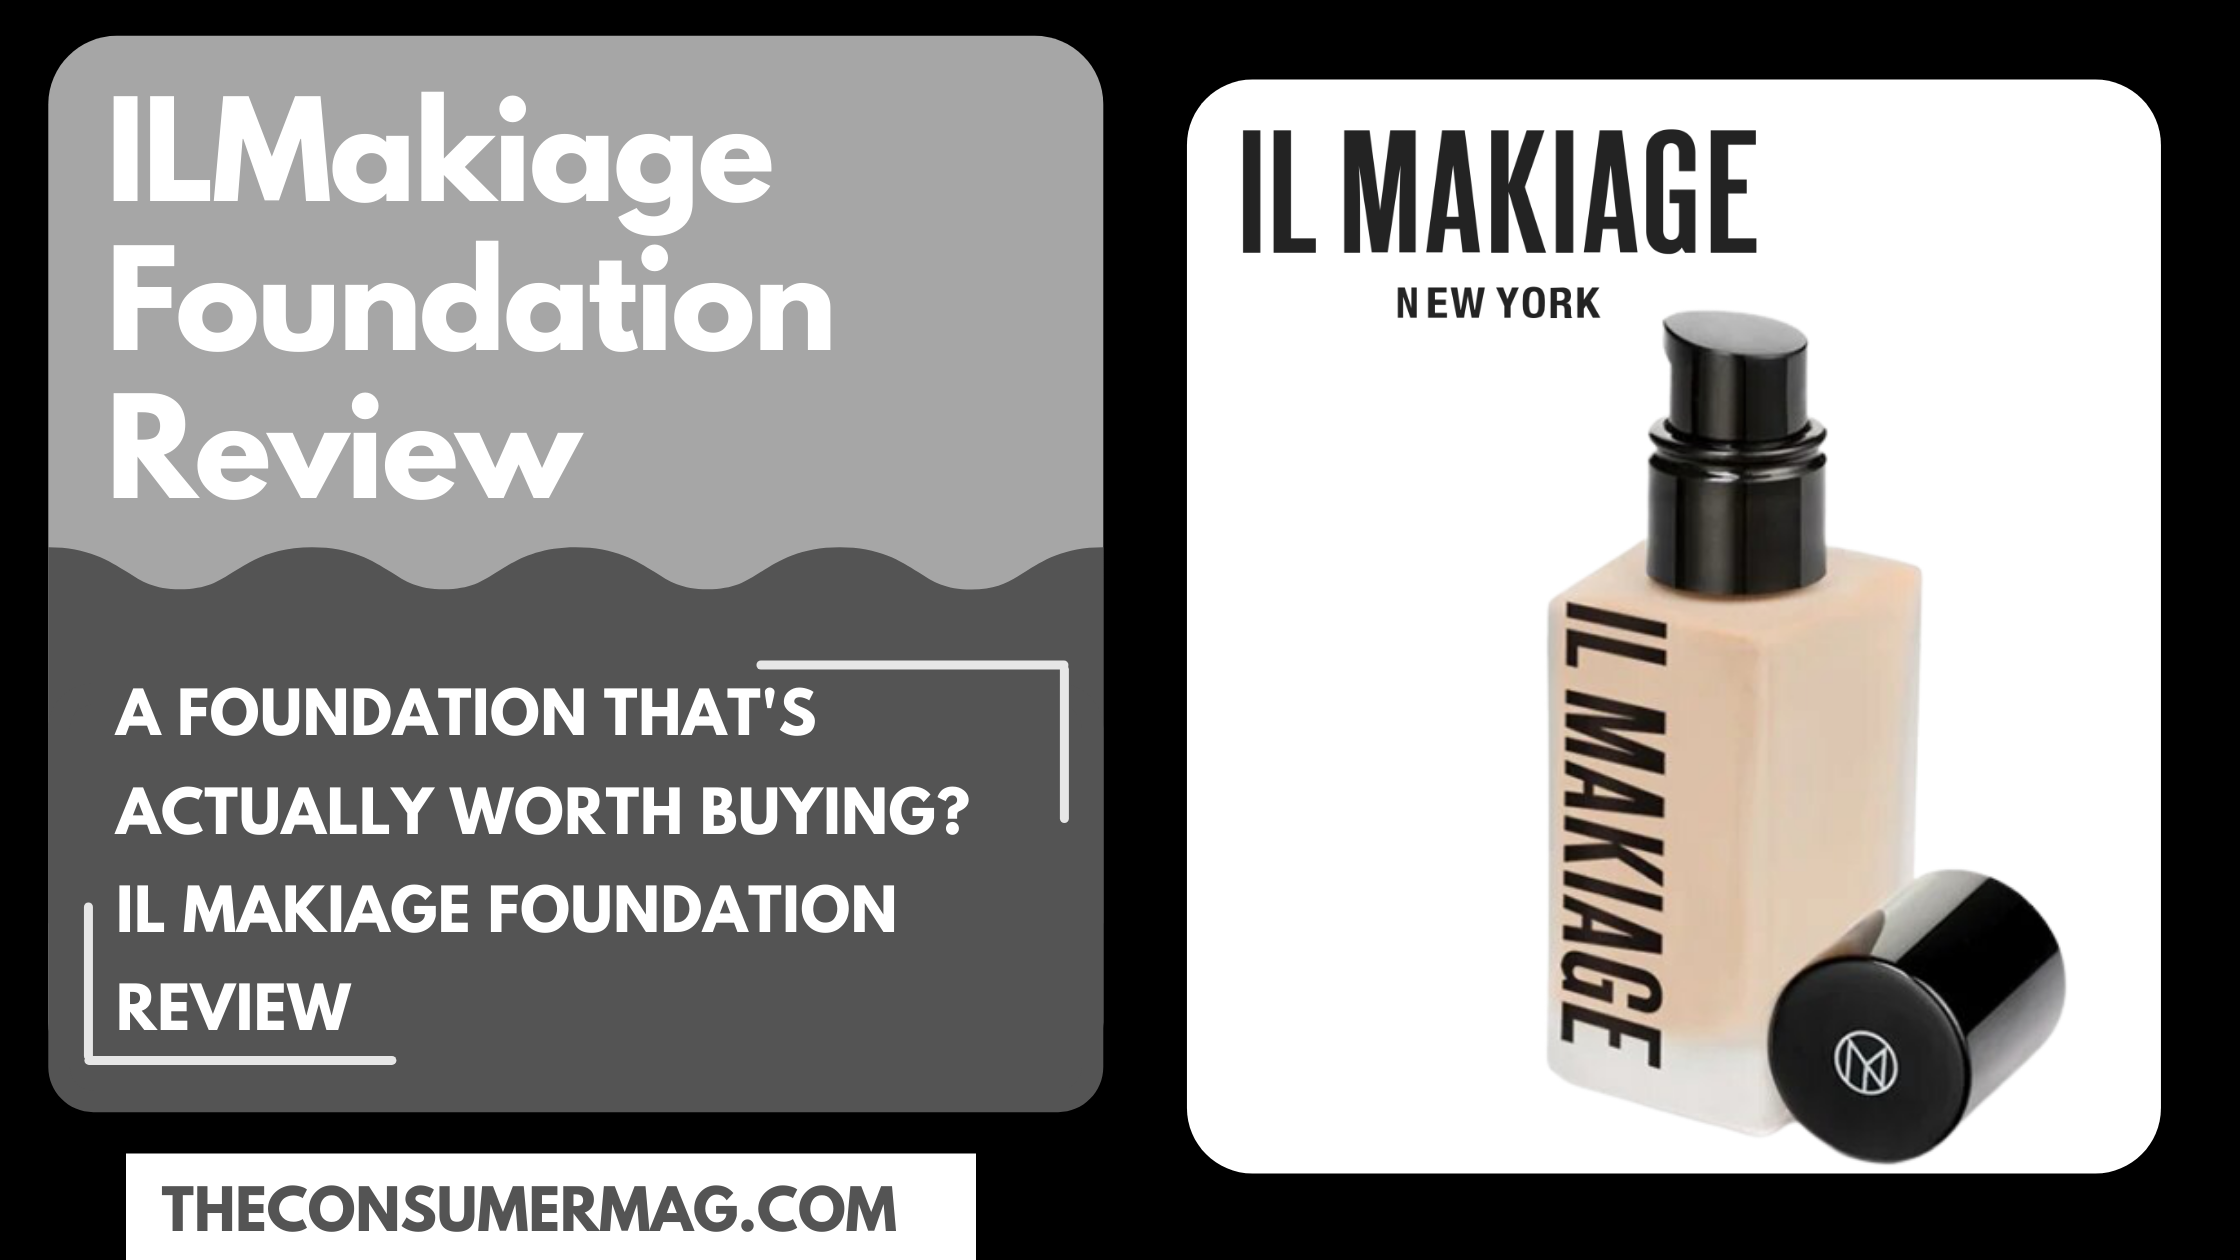 IL Makiage Foundation Review